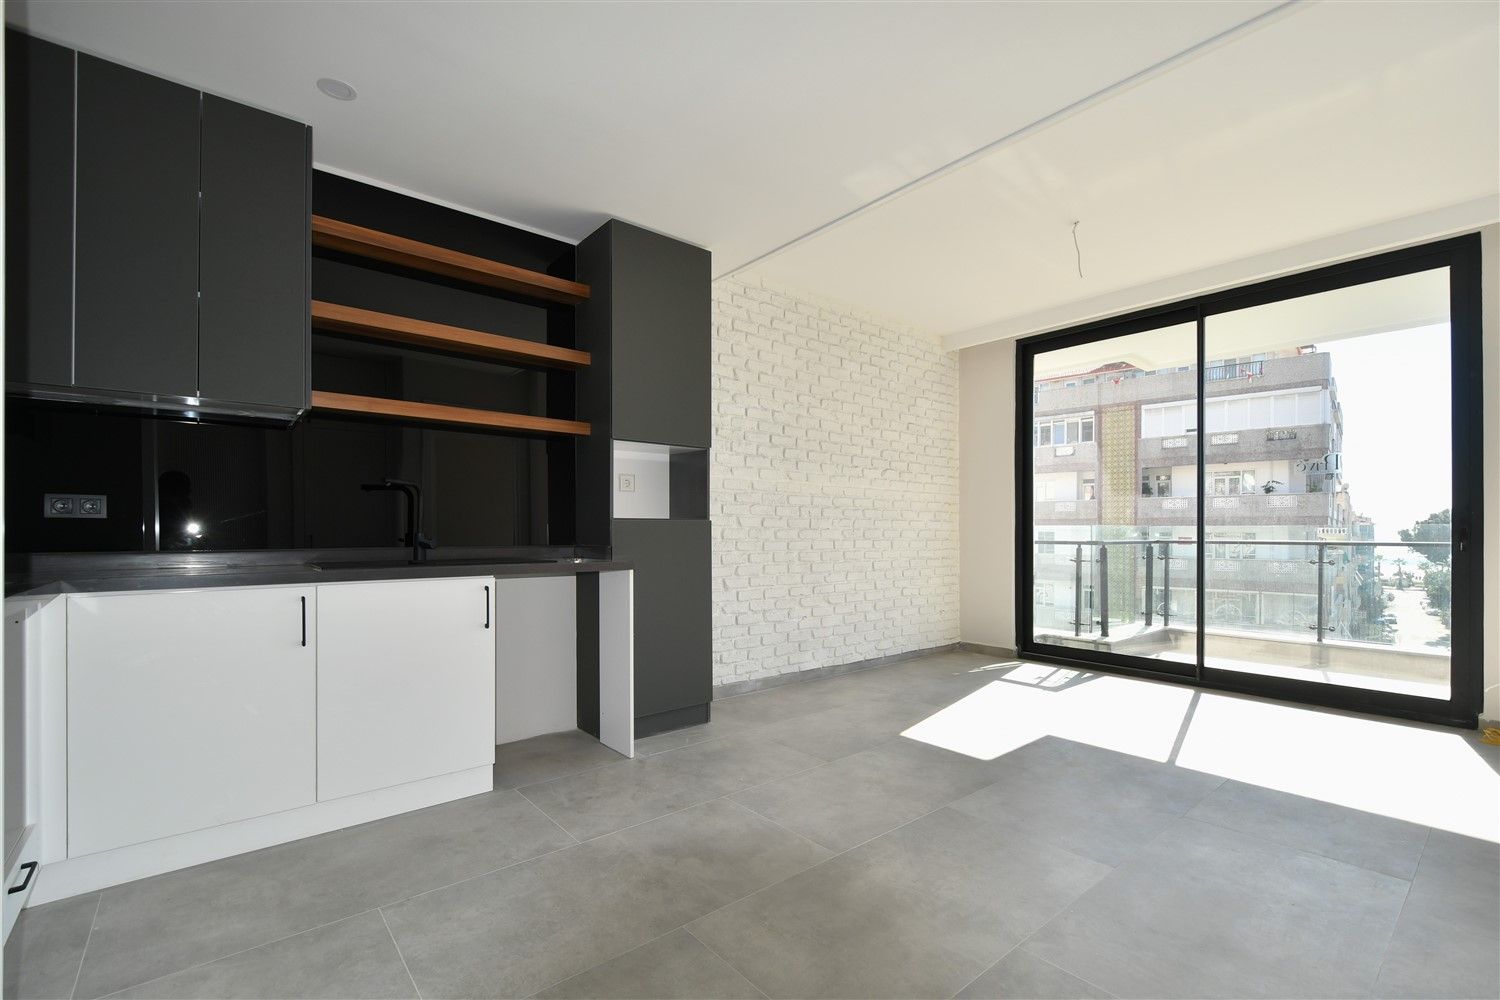 Apartments 1+1 in a new building, luxurious location in Cleopatra district